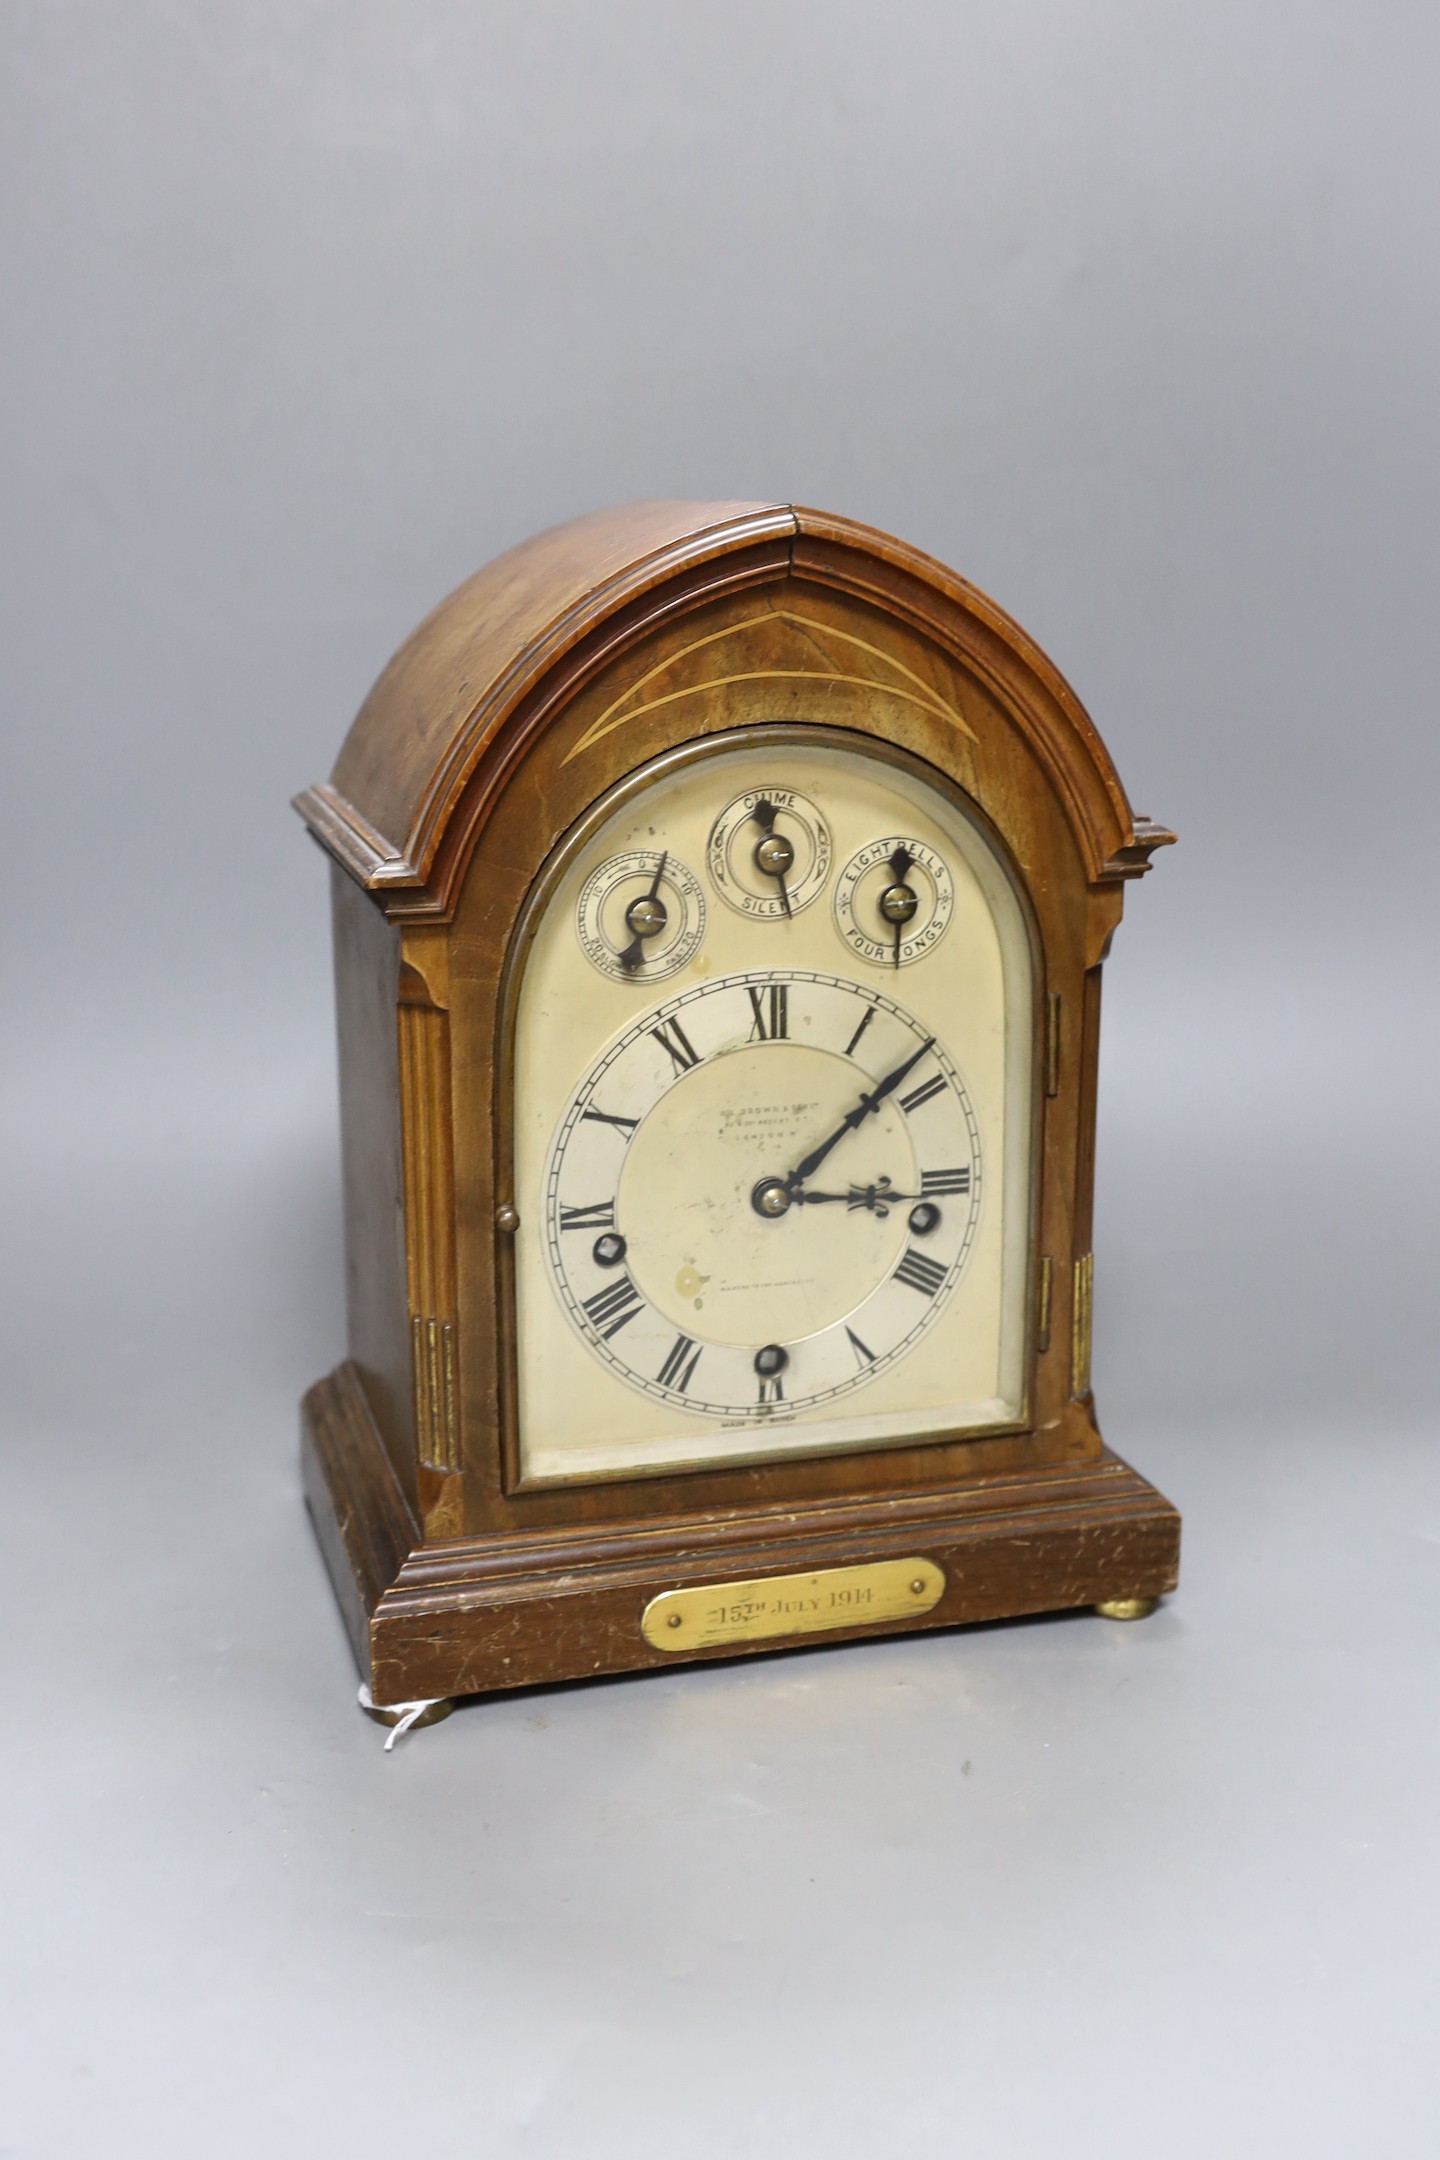 A George V inlaid walnut lancet shaped chiming mantel clock, with German movement and 15th July 1914 presentation plaque. 29cm high                                                                                         